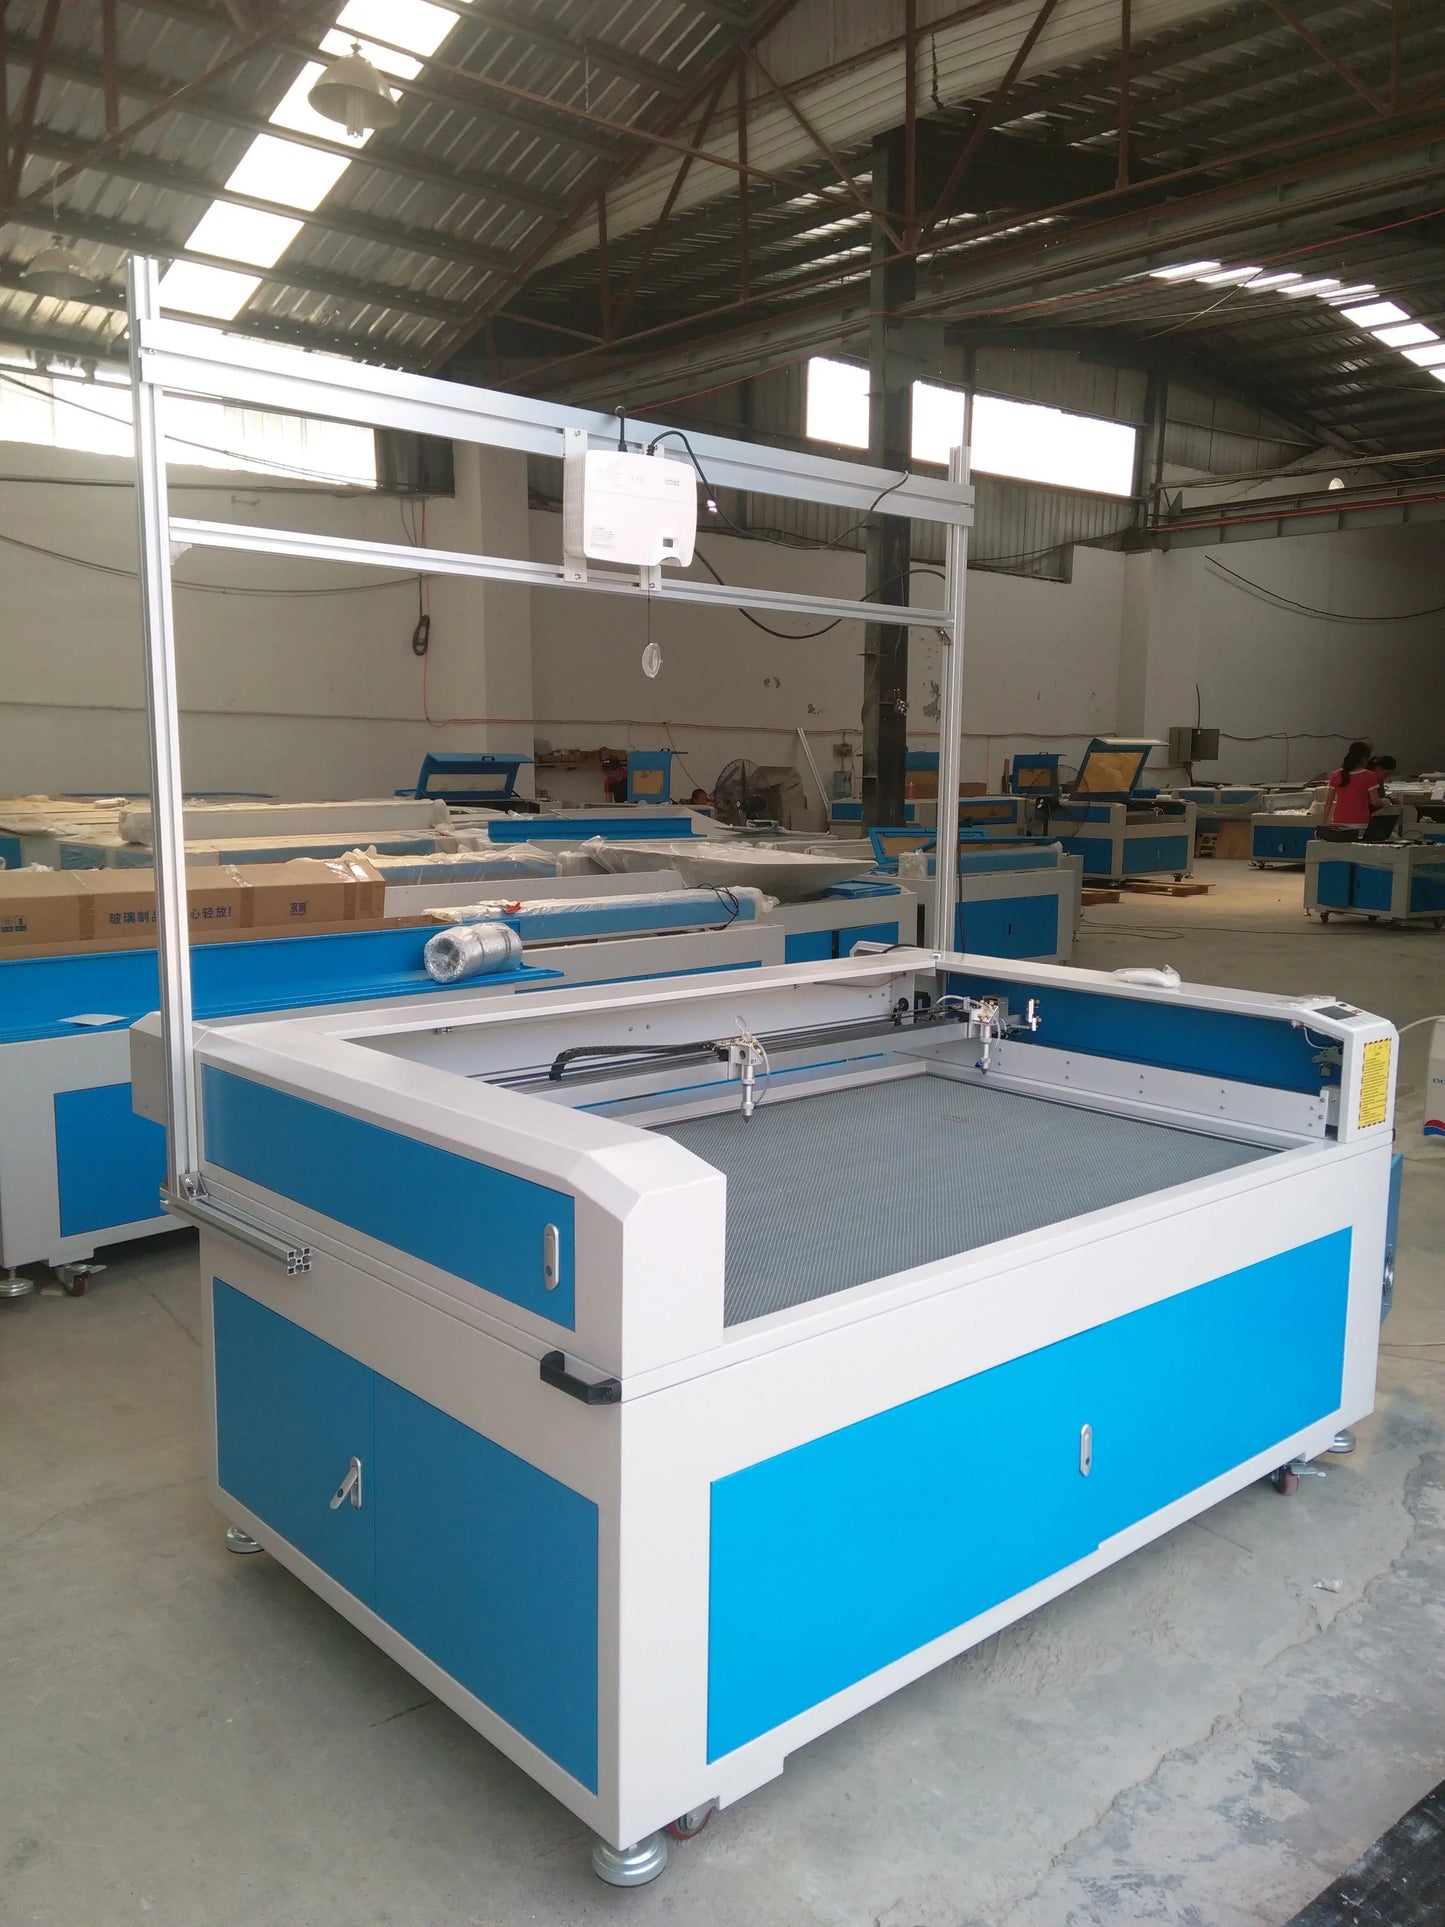  CNC Laser CO2 1810 con proyector